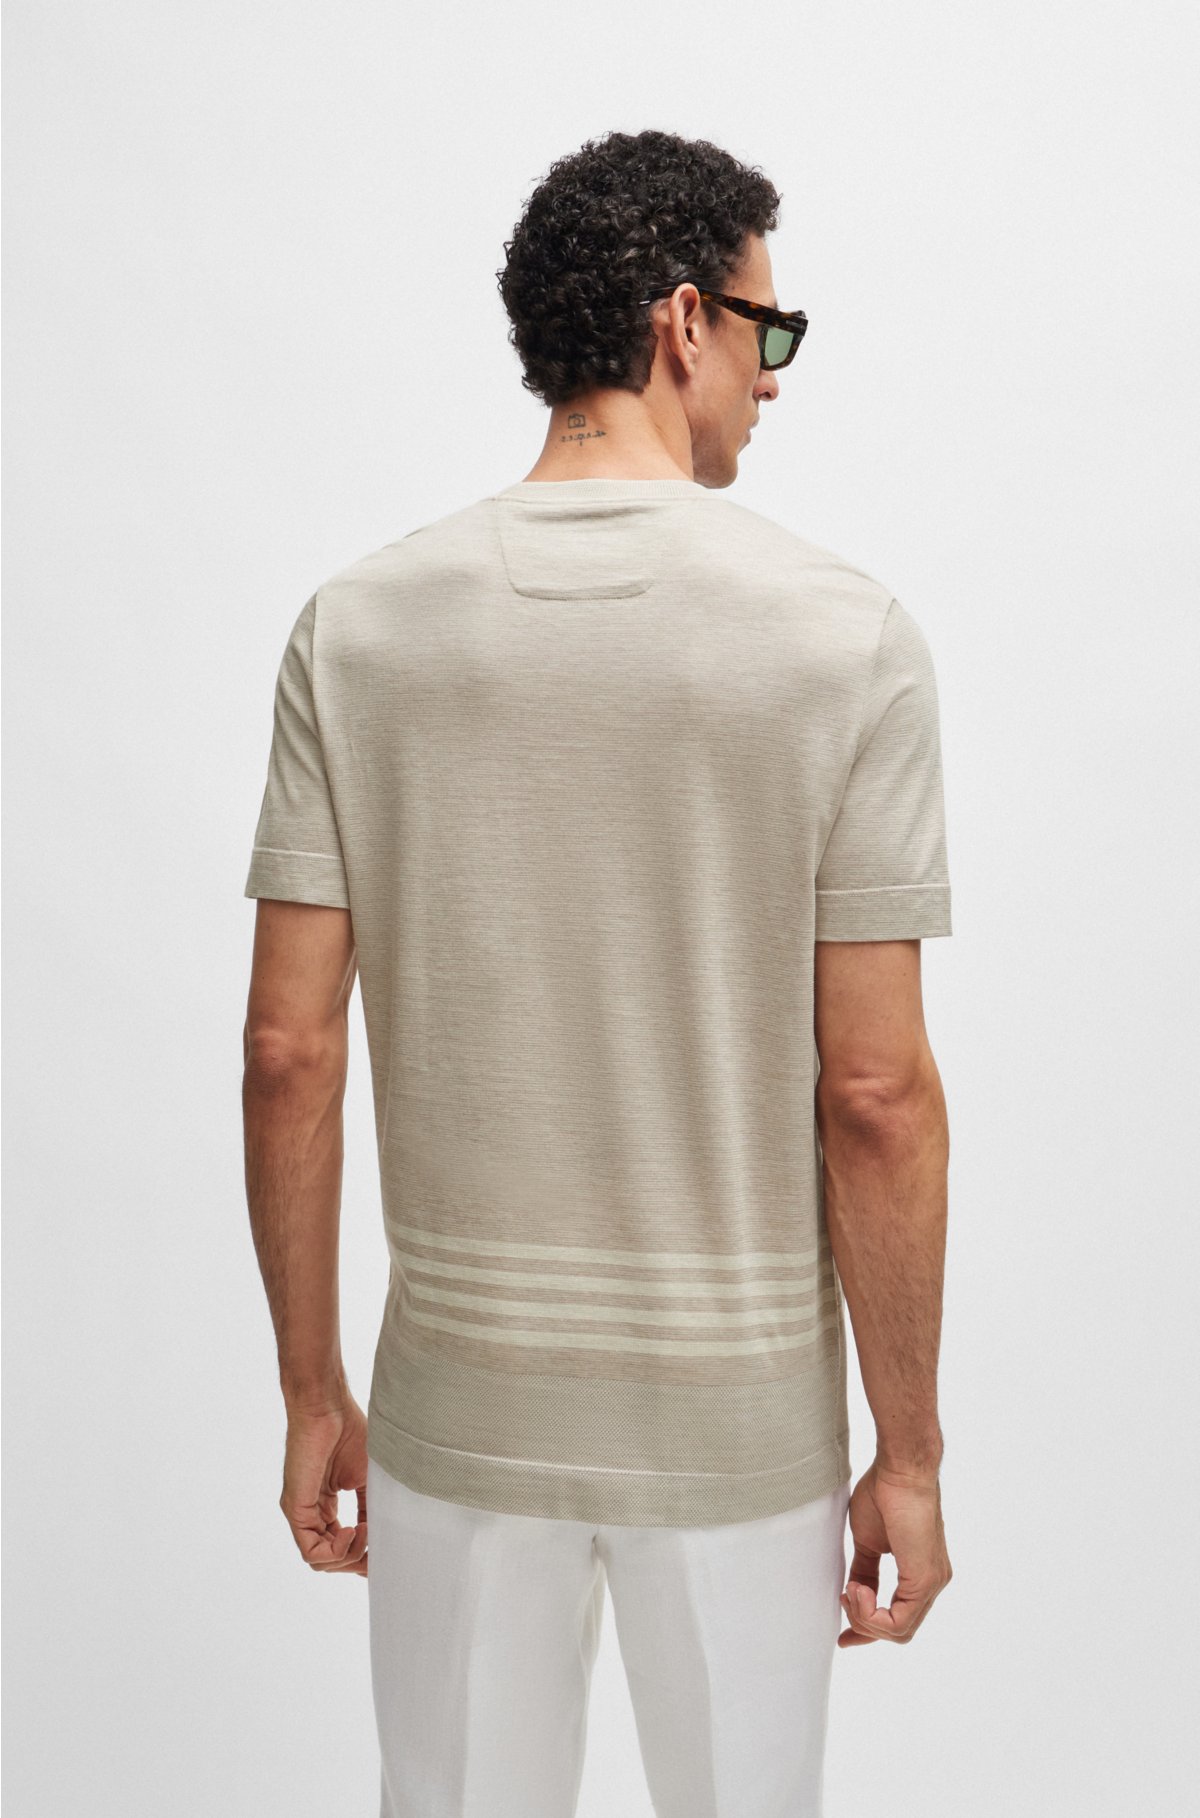 Stripe-detail T-shirt in cotton and silk, Natural